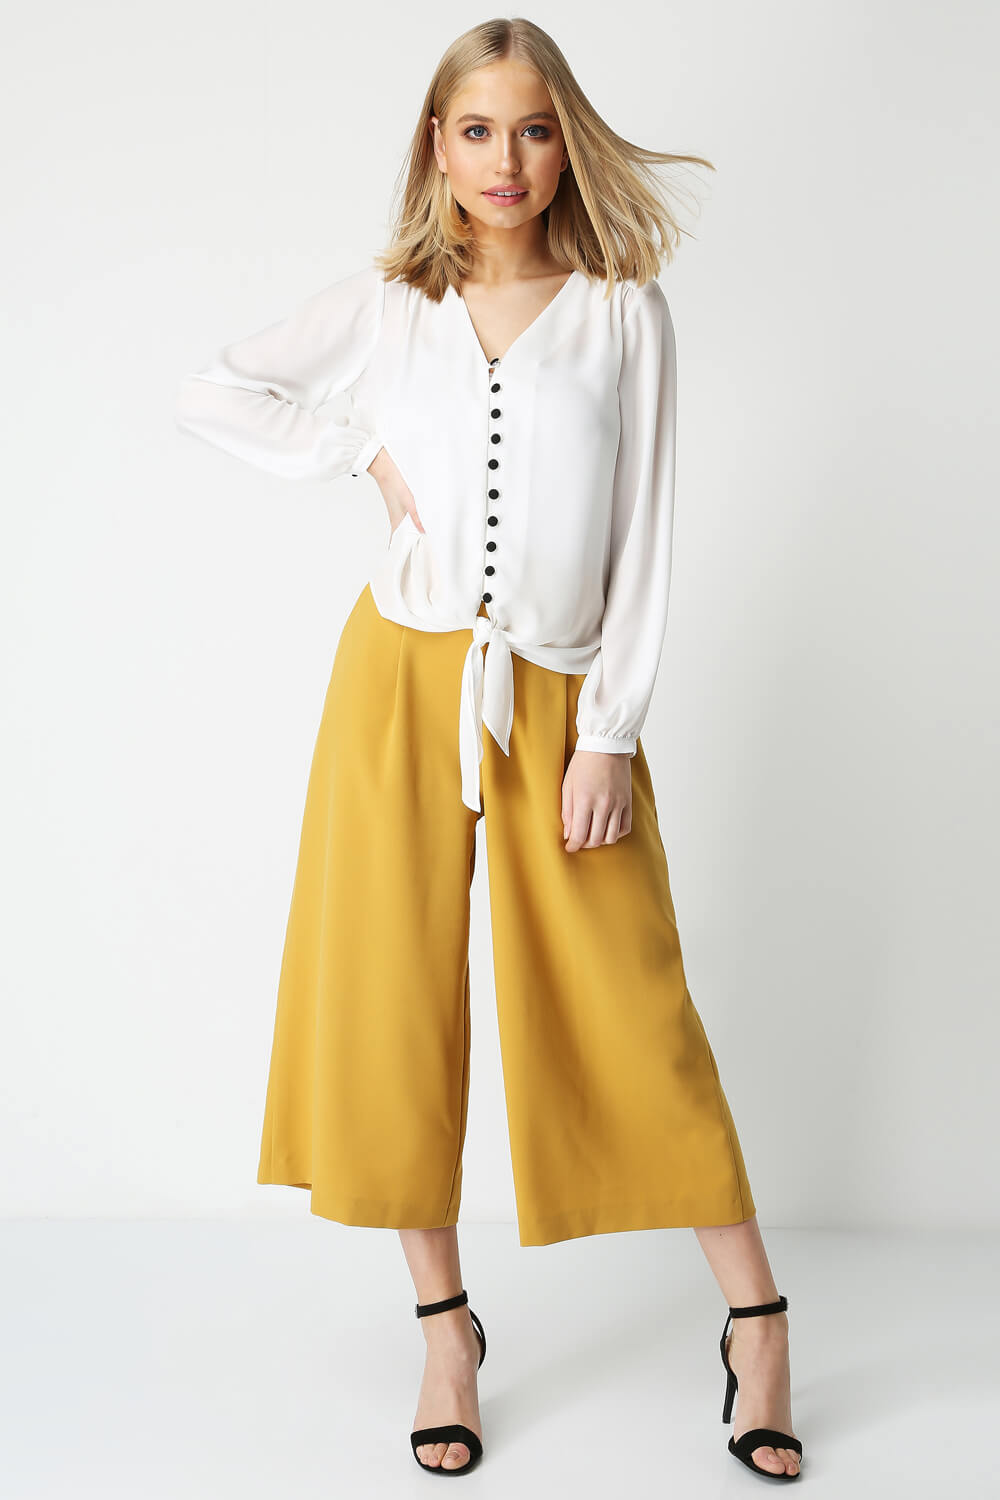 Ivory  Contrast Button Tie Front Blouse, Image 2 of 8